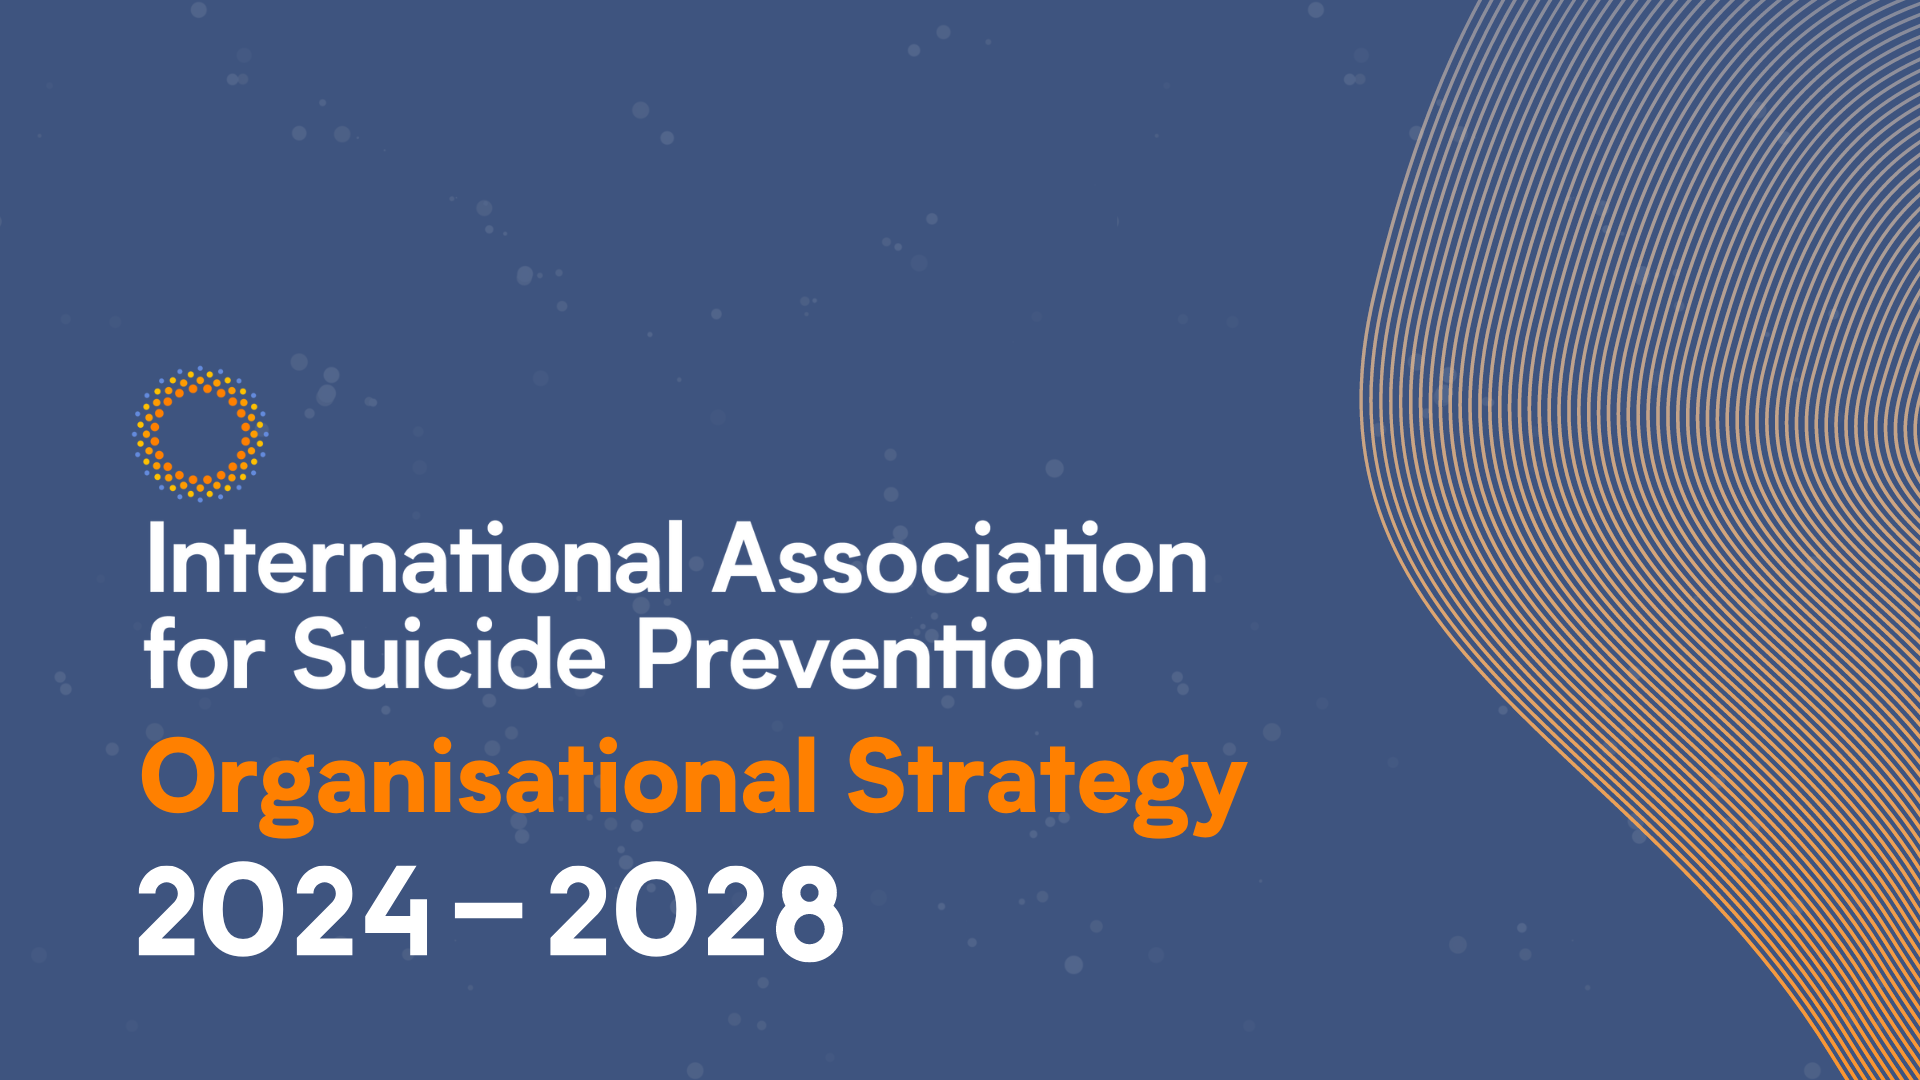 International Association for Suicide Prevention Organisational Strategy 2024-2028